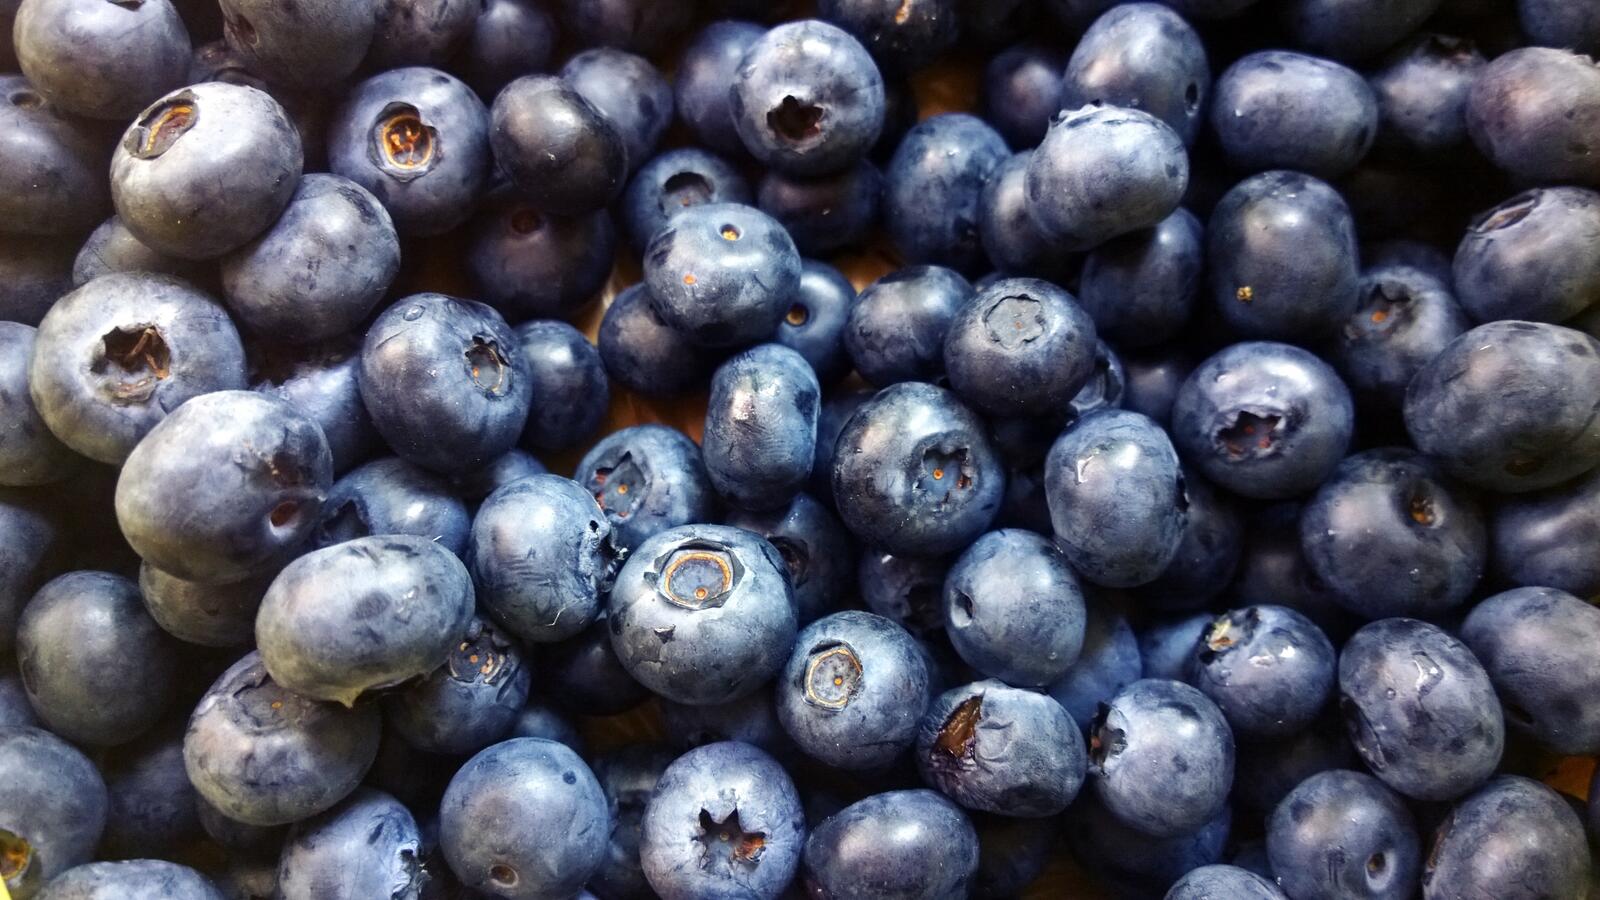 Wallpapers blueberry terrestrial plant produce on the desktop